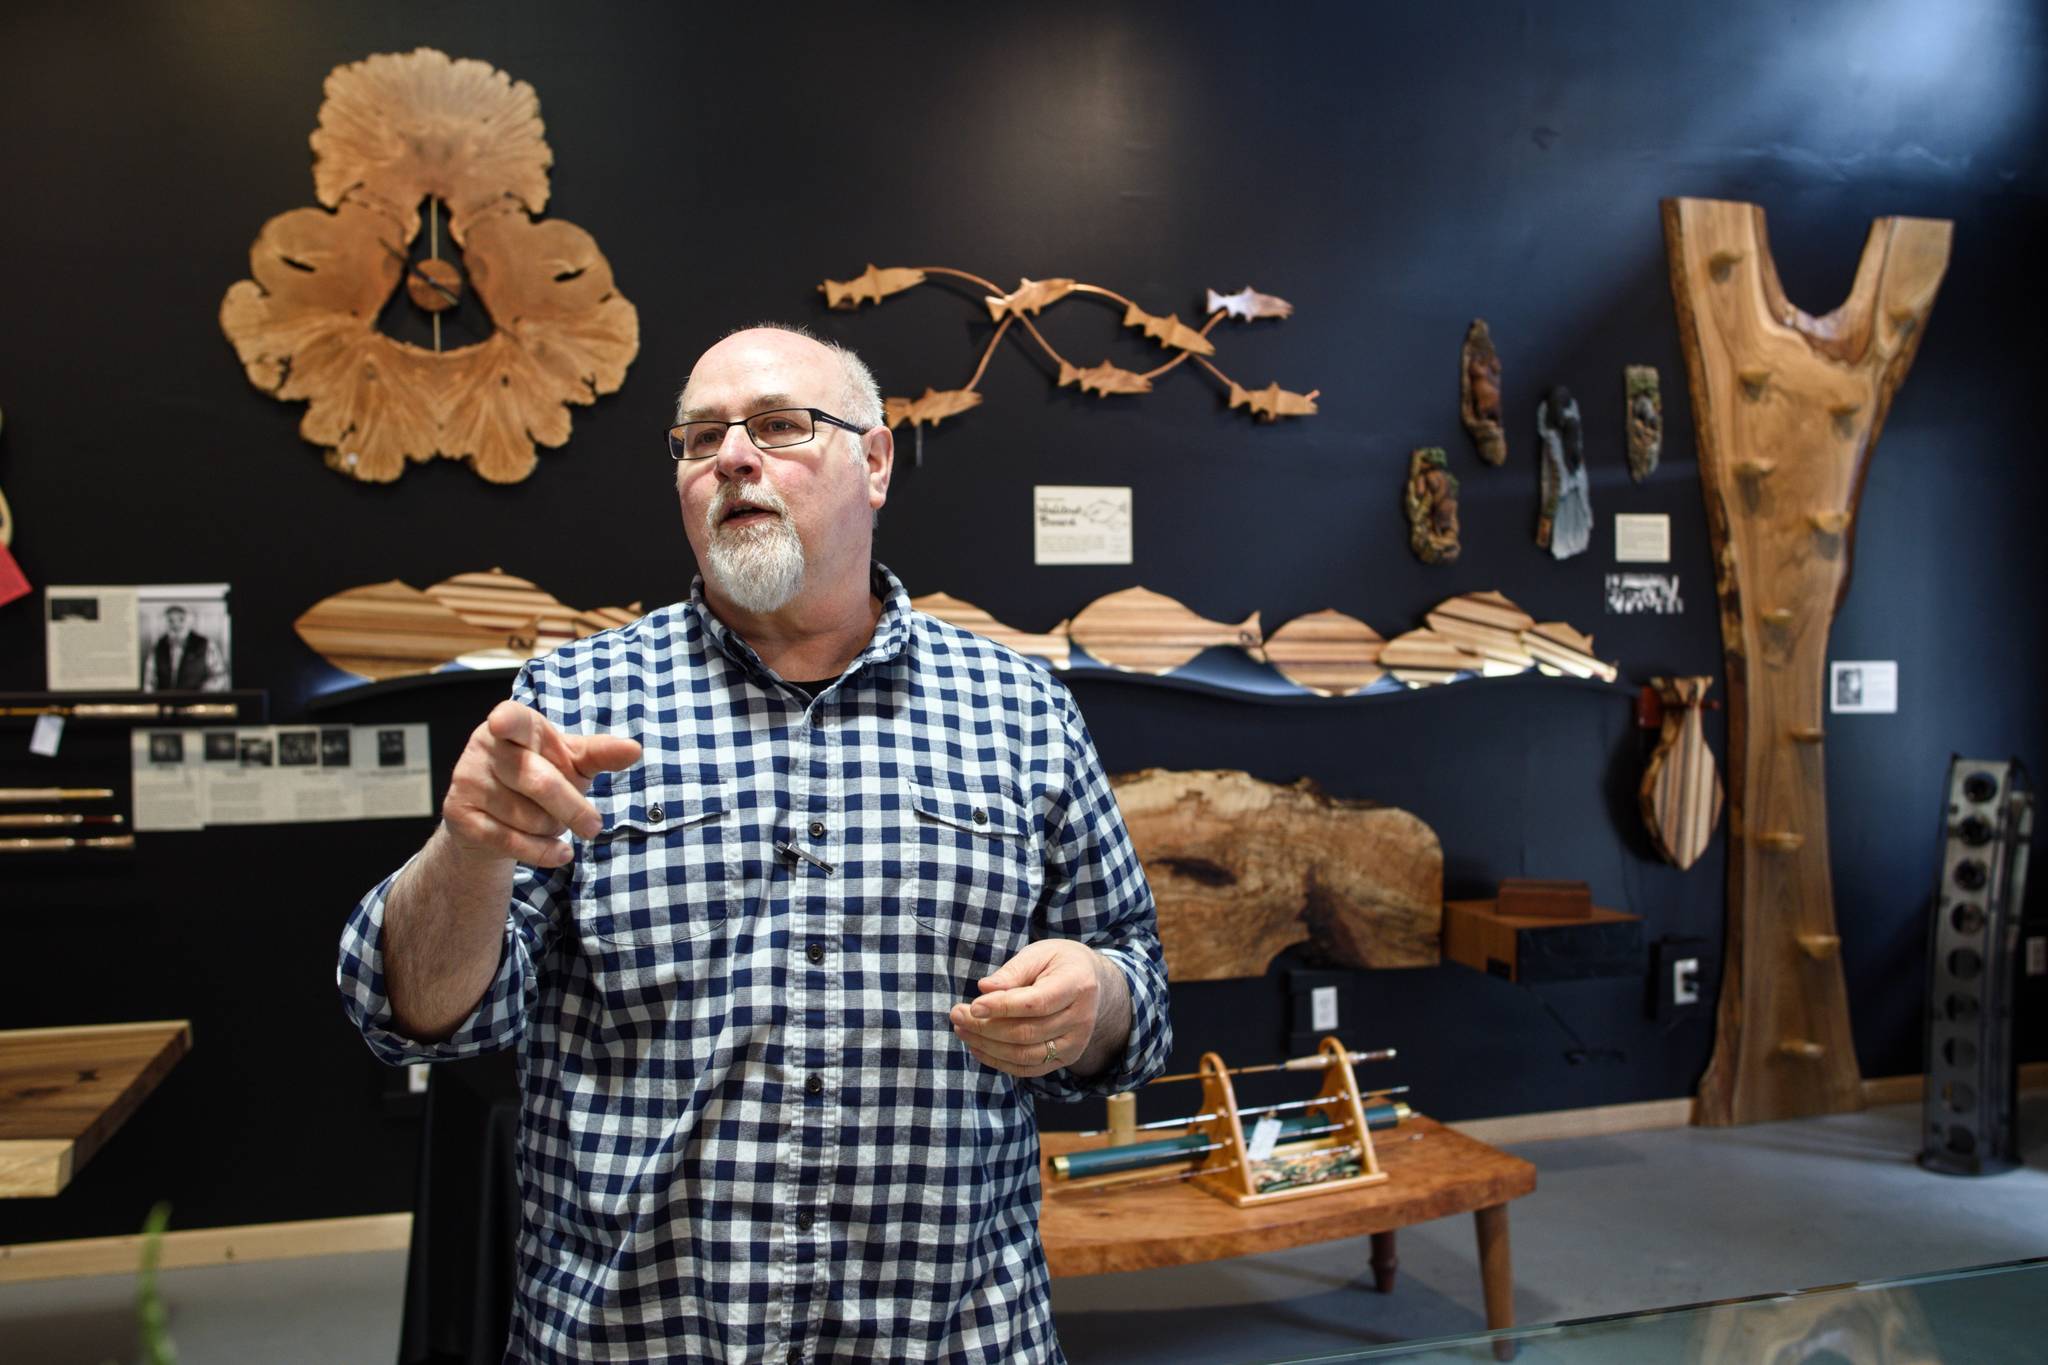 Forget diamonds. This new shop on Franklin showcases all local craftsmen